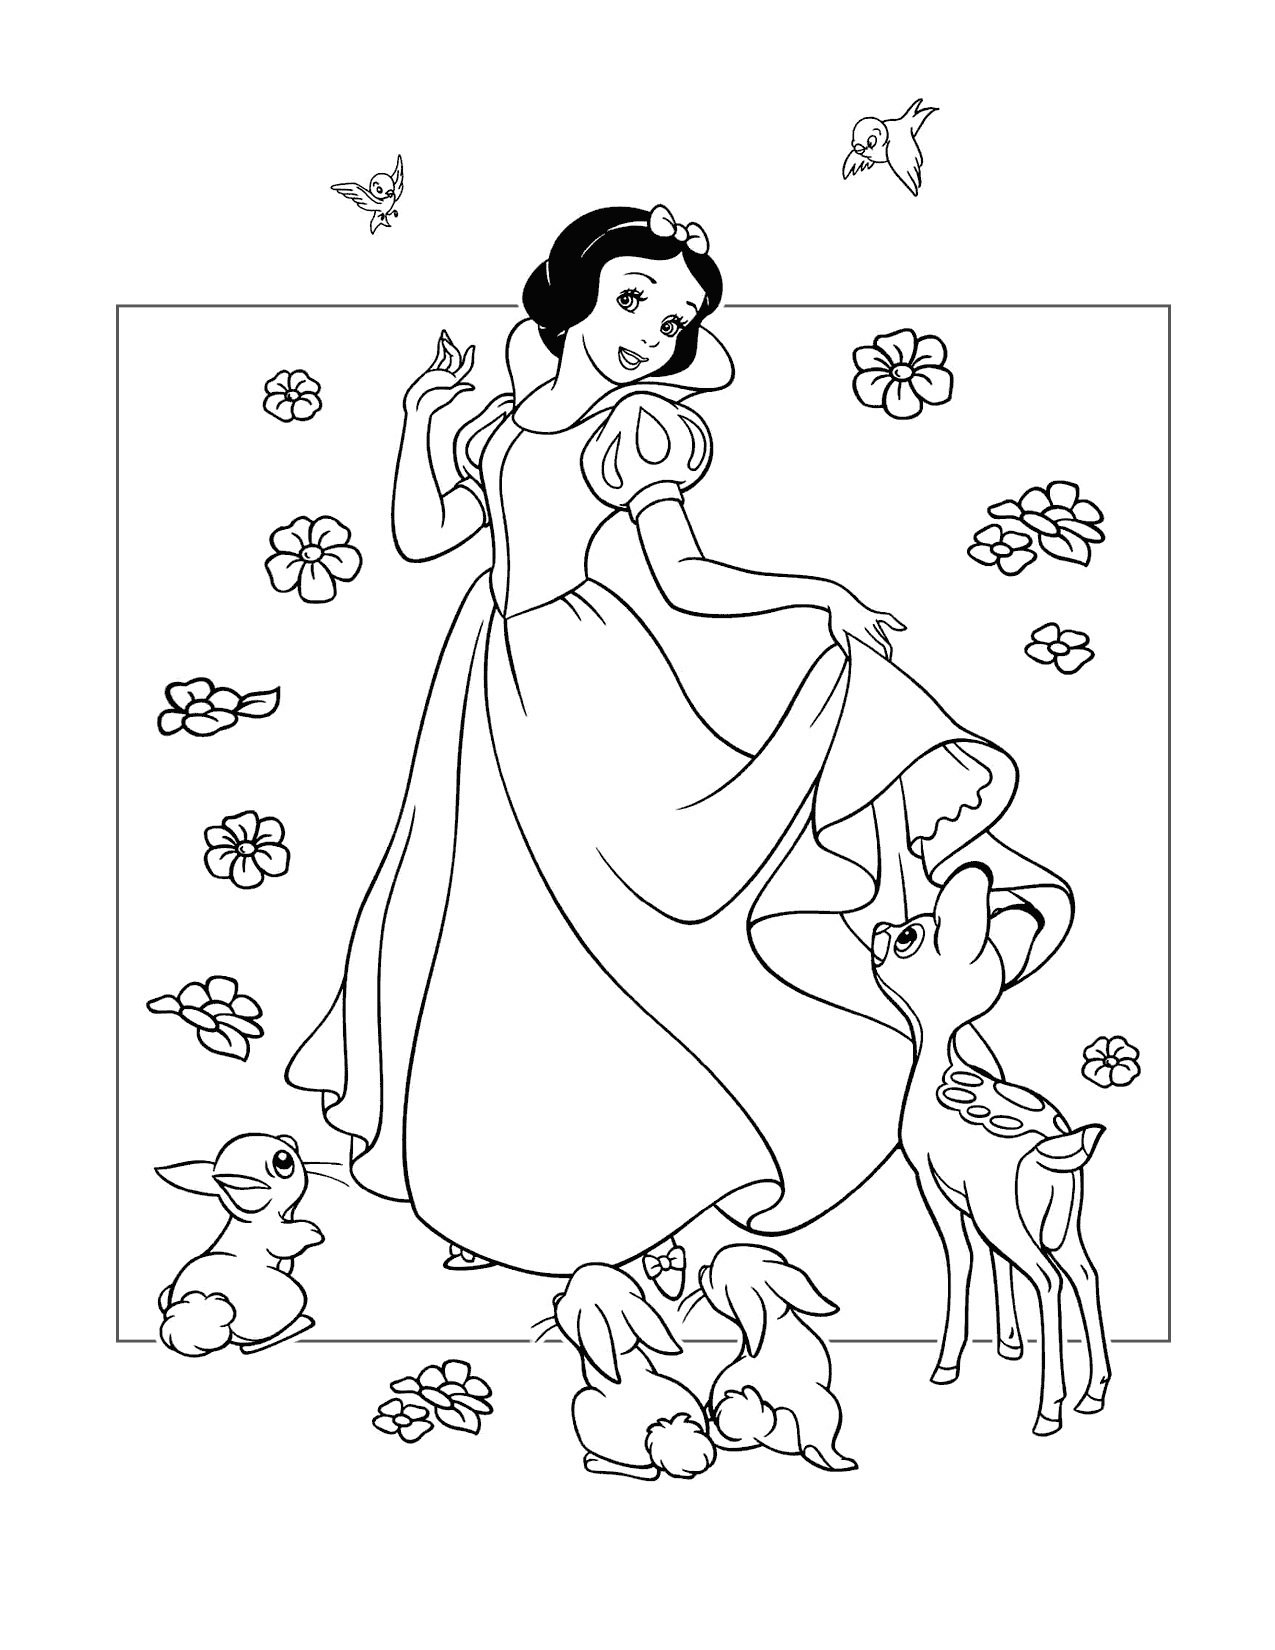 Snow White With The Animals Coloring Page